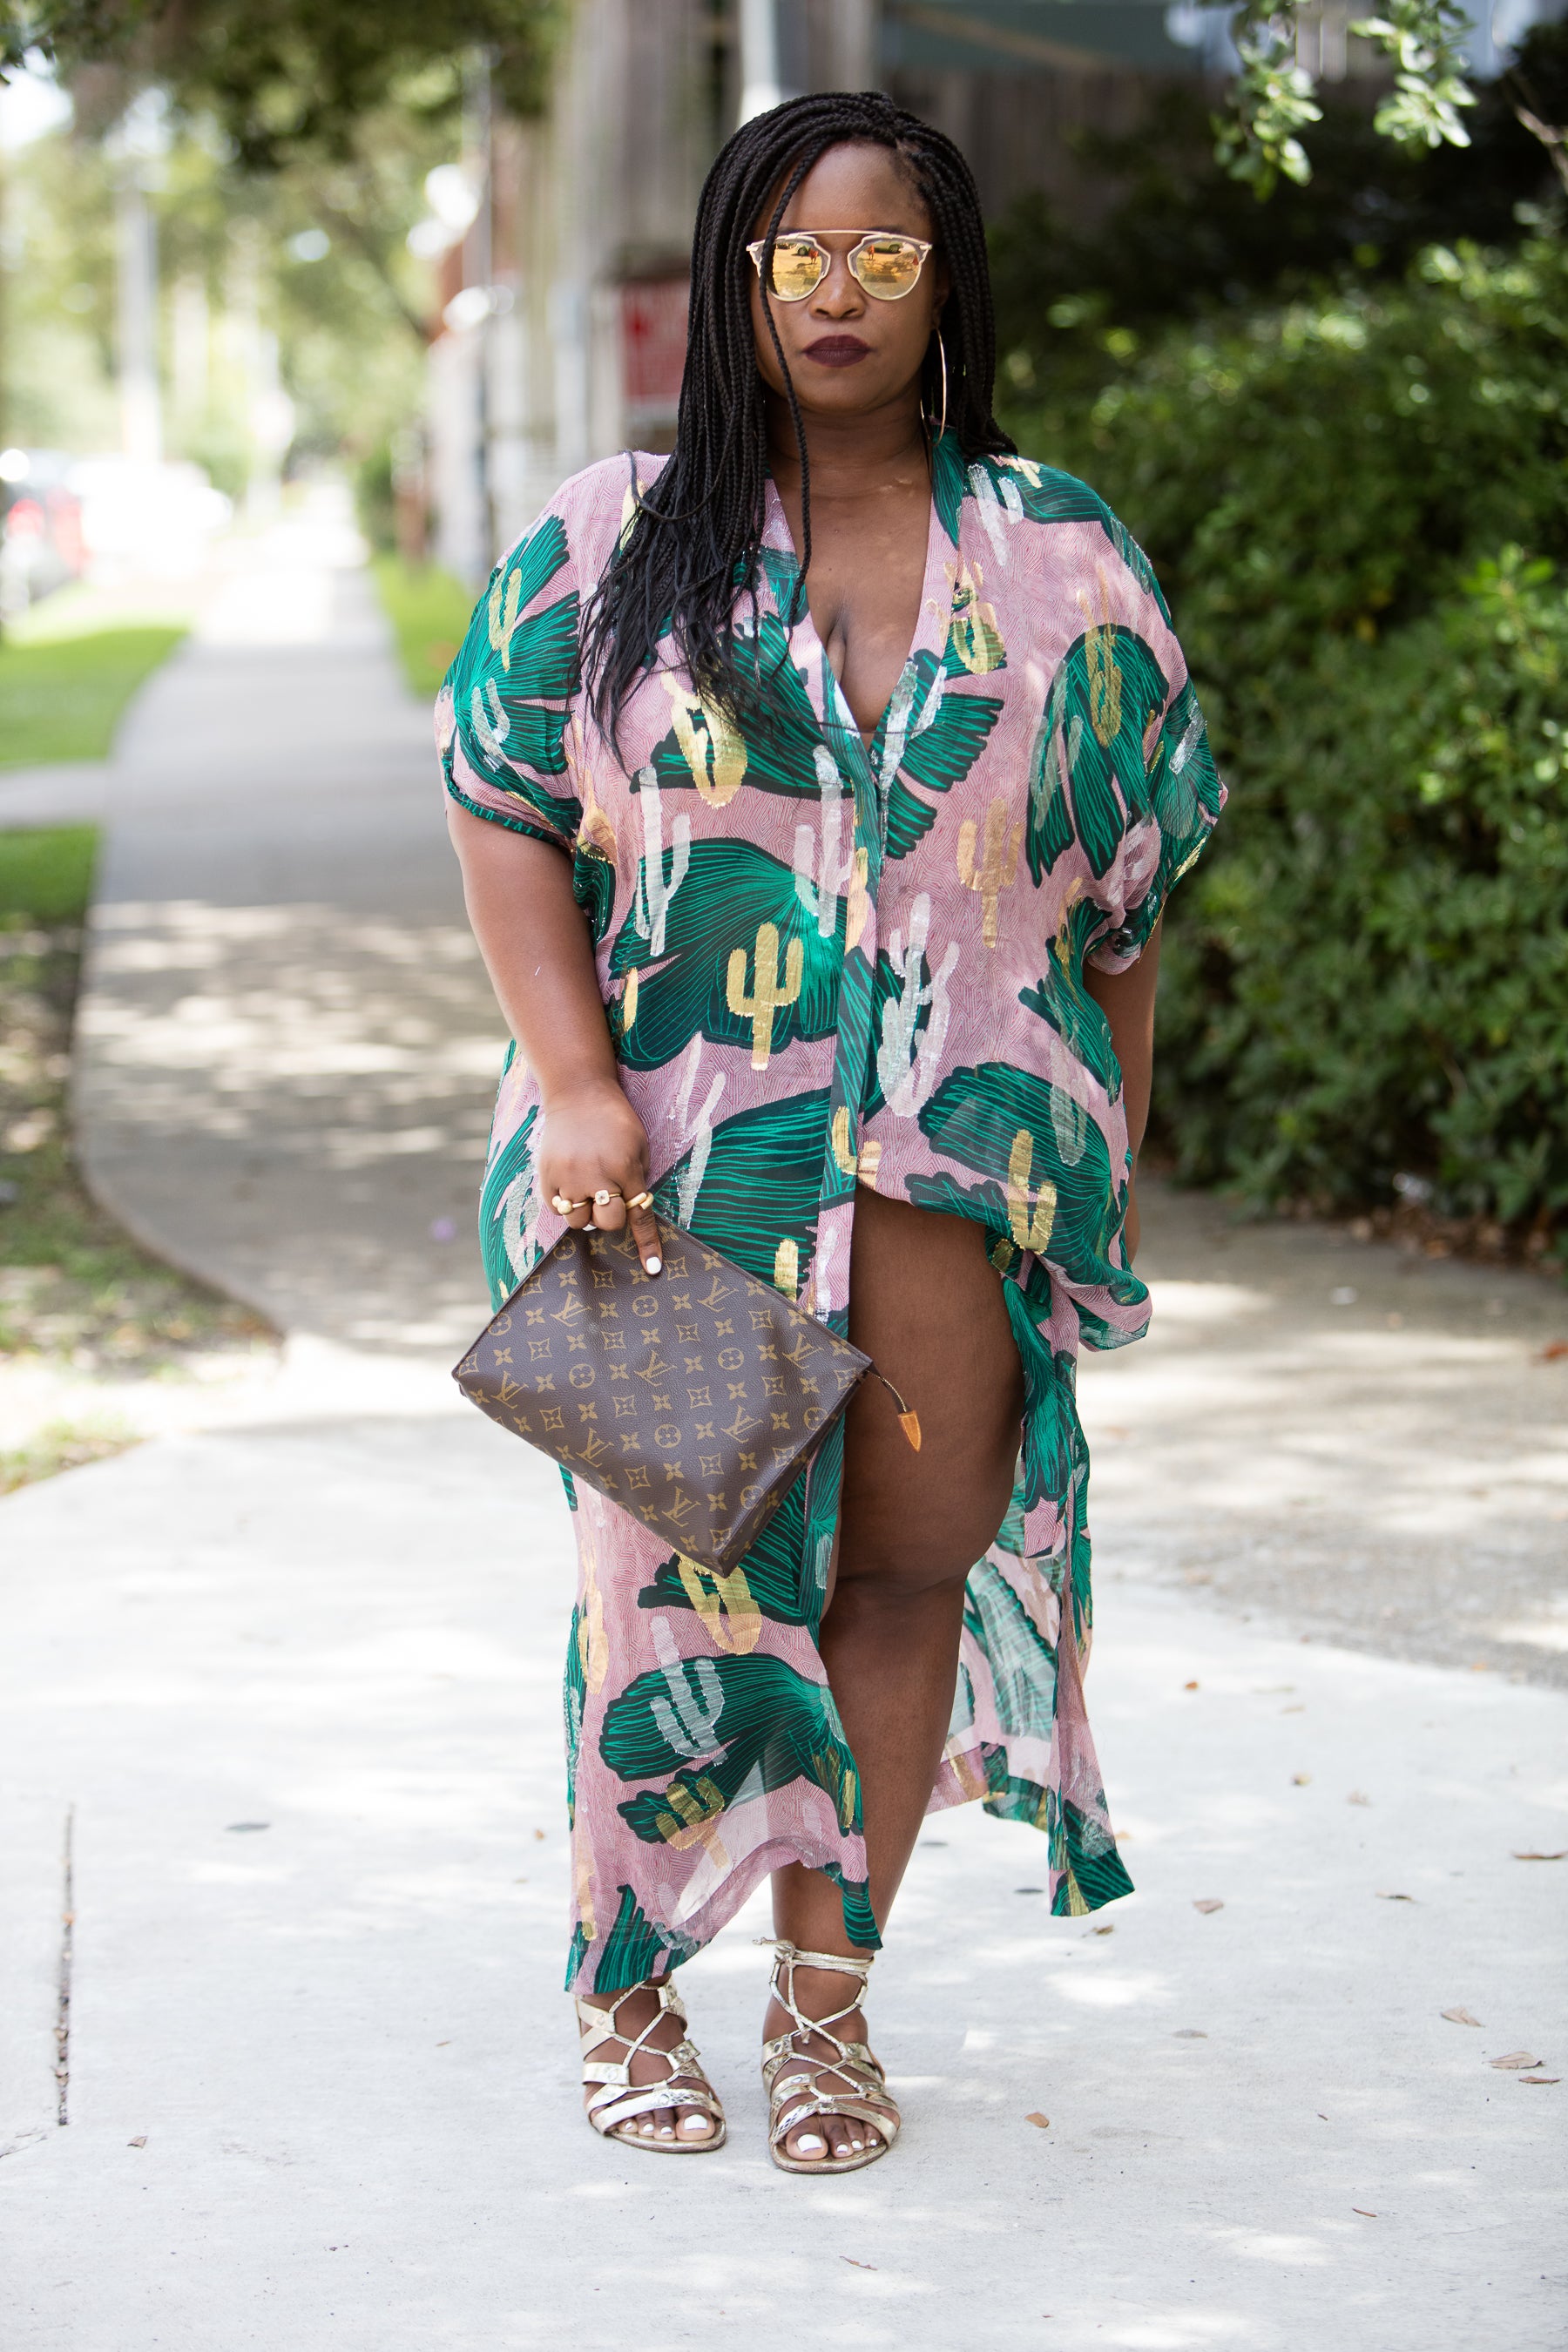 These Curvy Ladies Gave Us Epic Street Style Moments at ESSENCE Festival 2017
